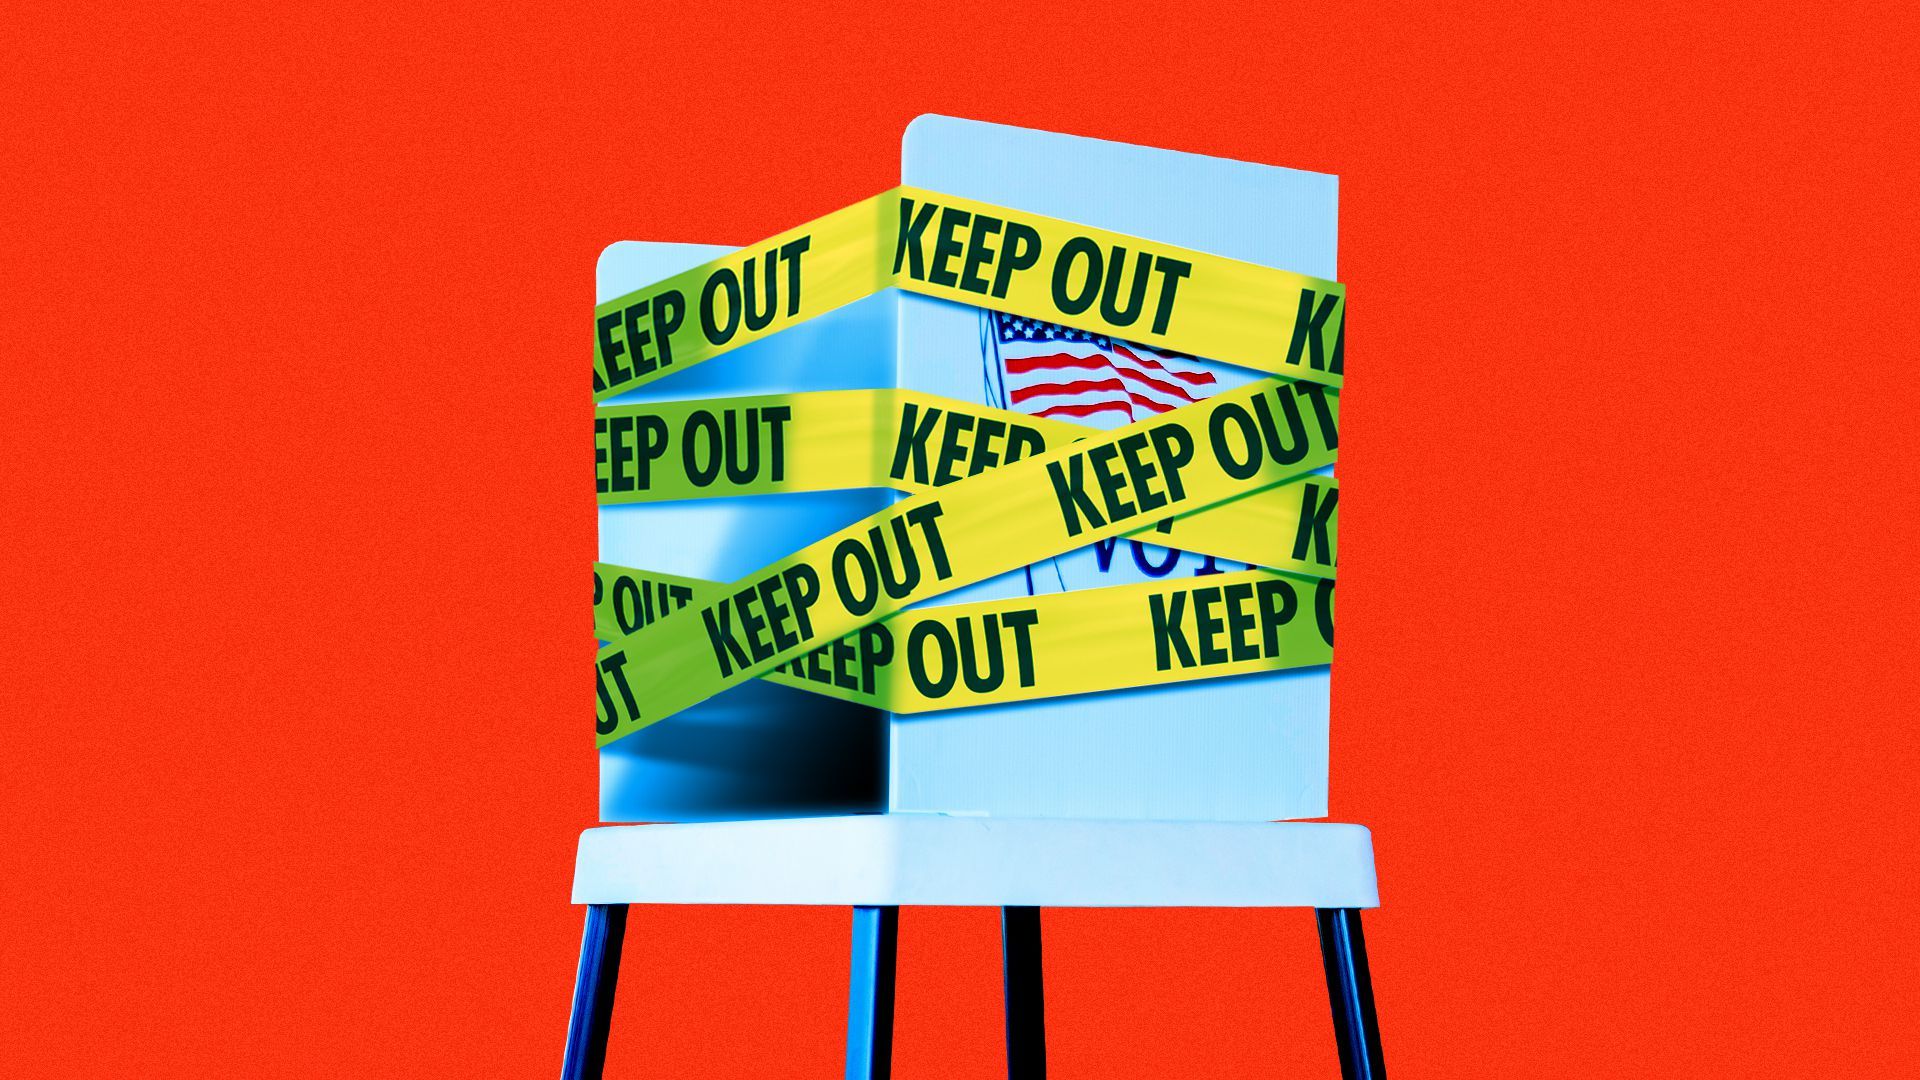 Where the 2024 GOP Presidential Candidates Stand on Voting Rights and  Democracy - Democracy Docket